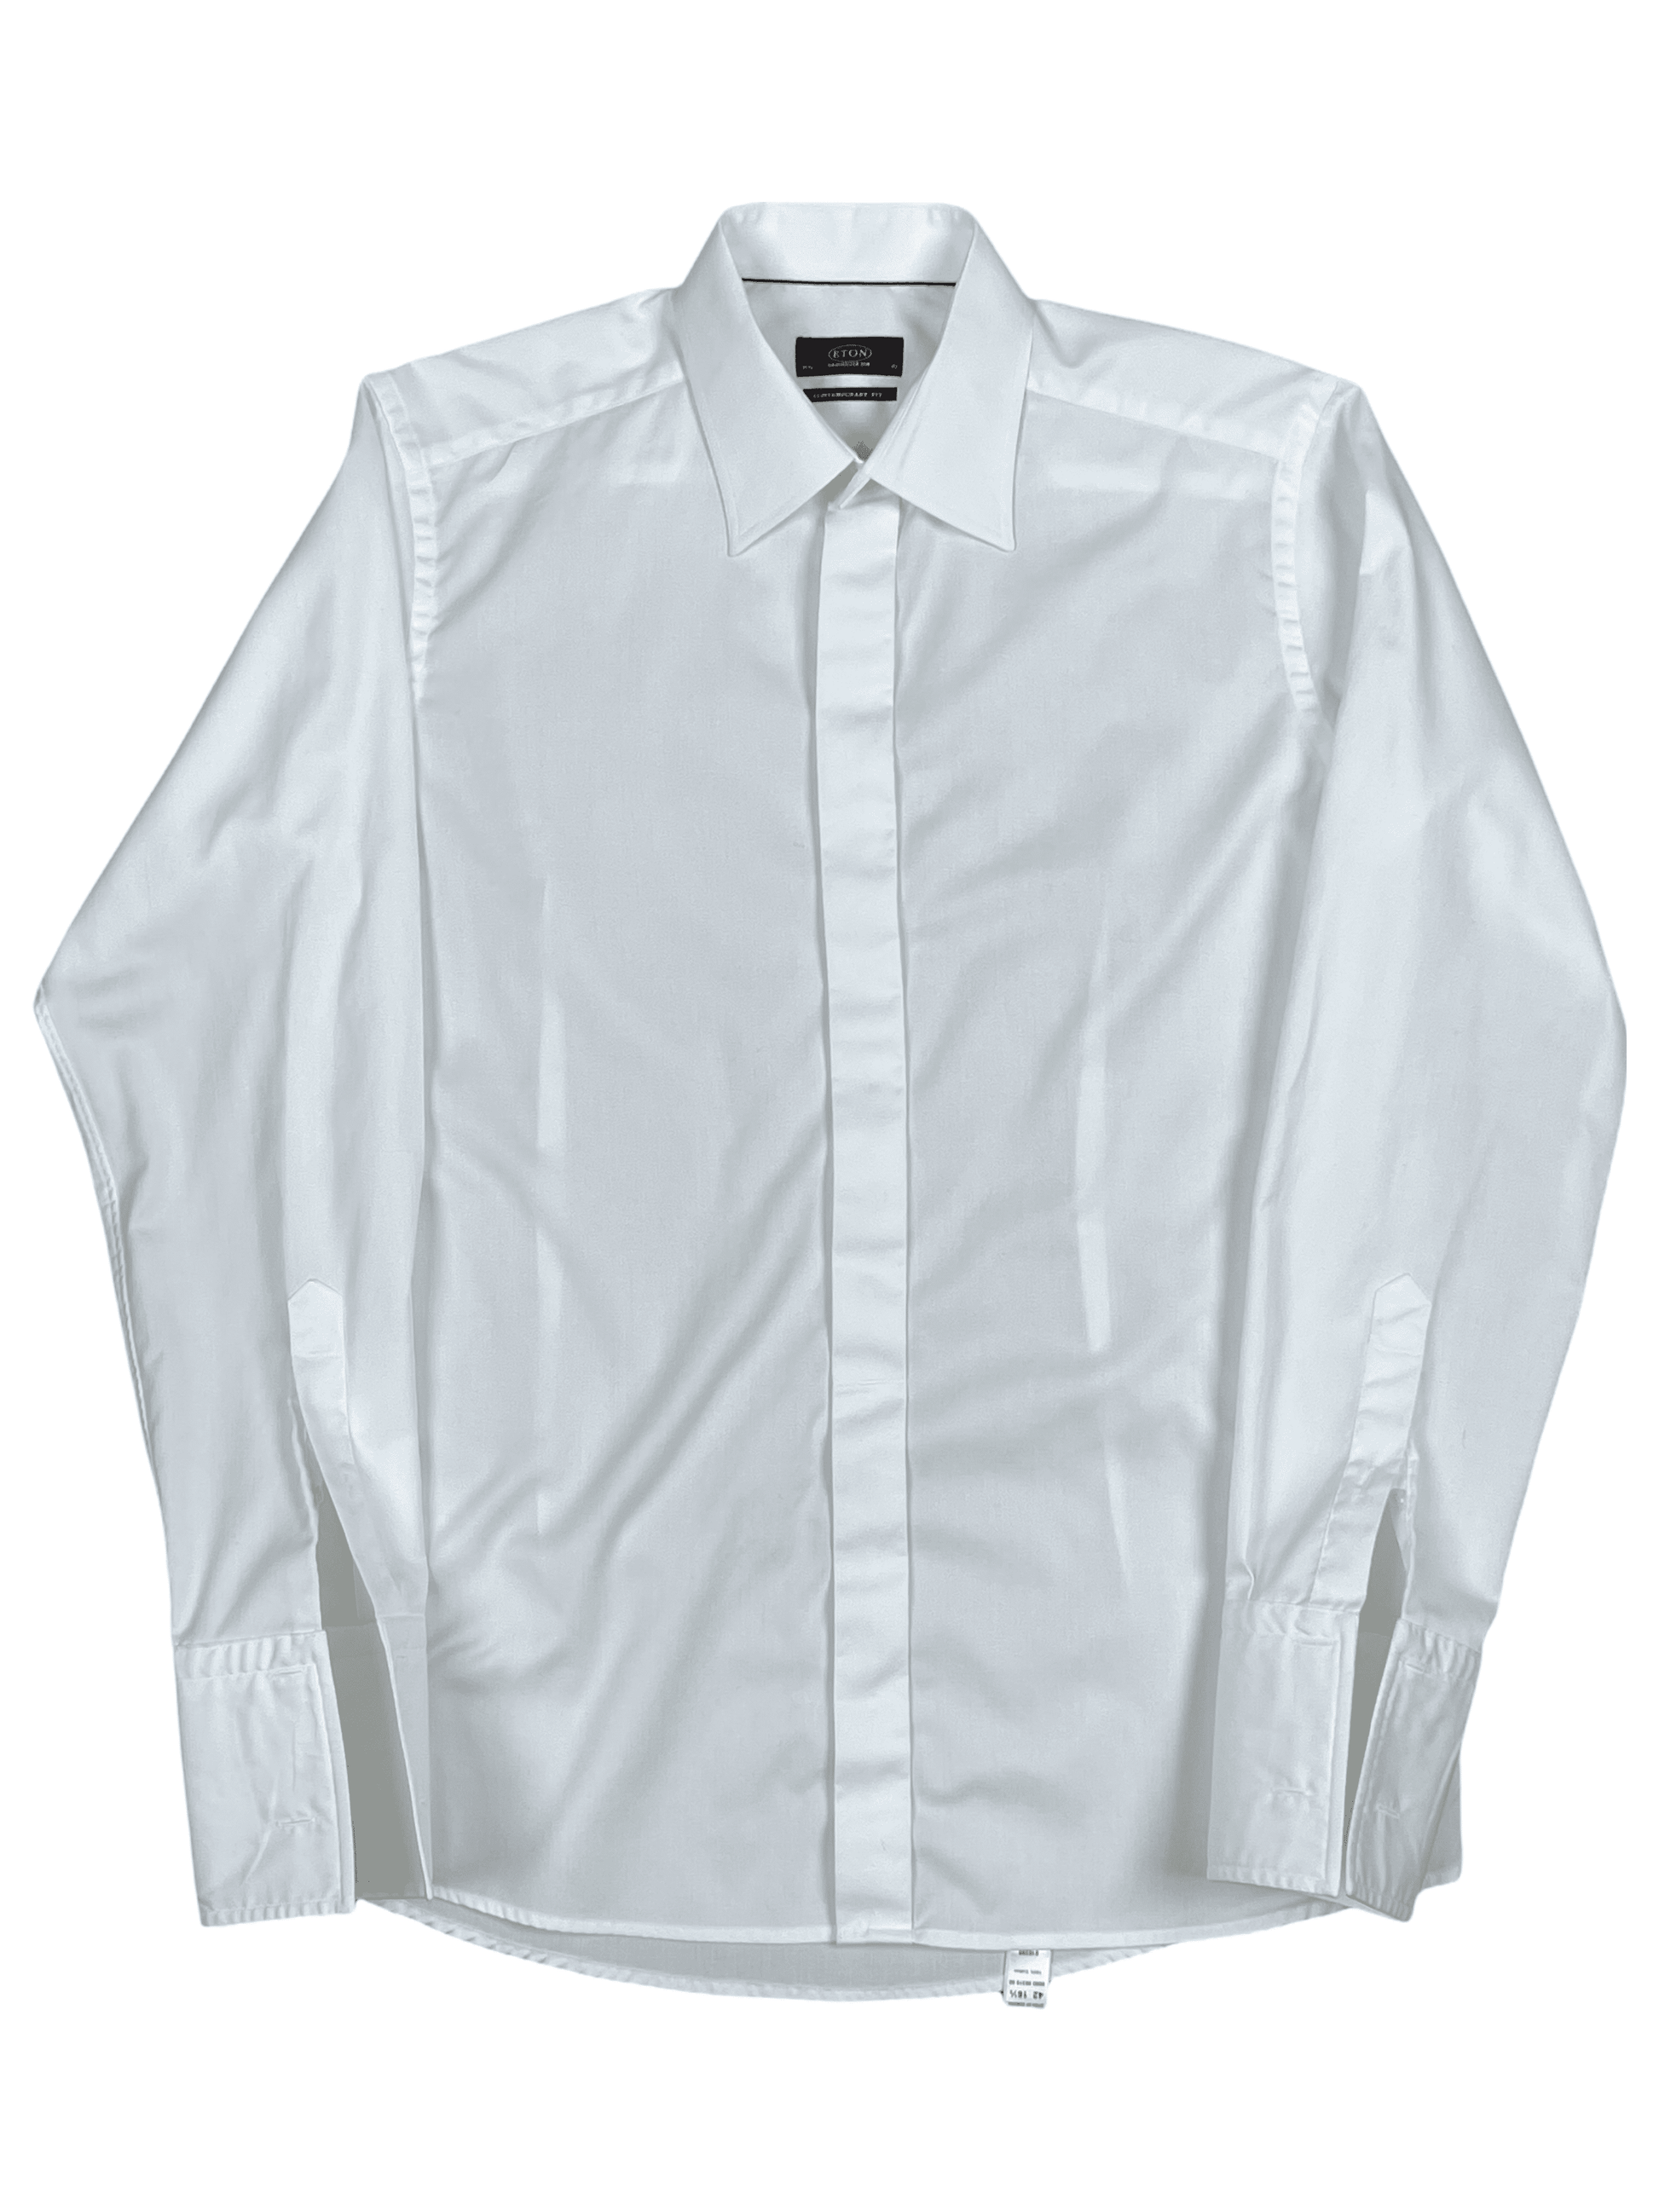 ETON White Cotton Dress Shirt 16.5 / 42 - Genuine Design Luxury Consignment for Men. New & Pre-Owned Clothing, Shoes, & Accessories. Calgary, Canada